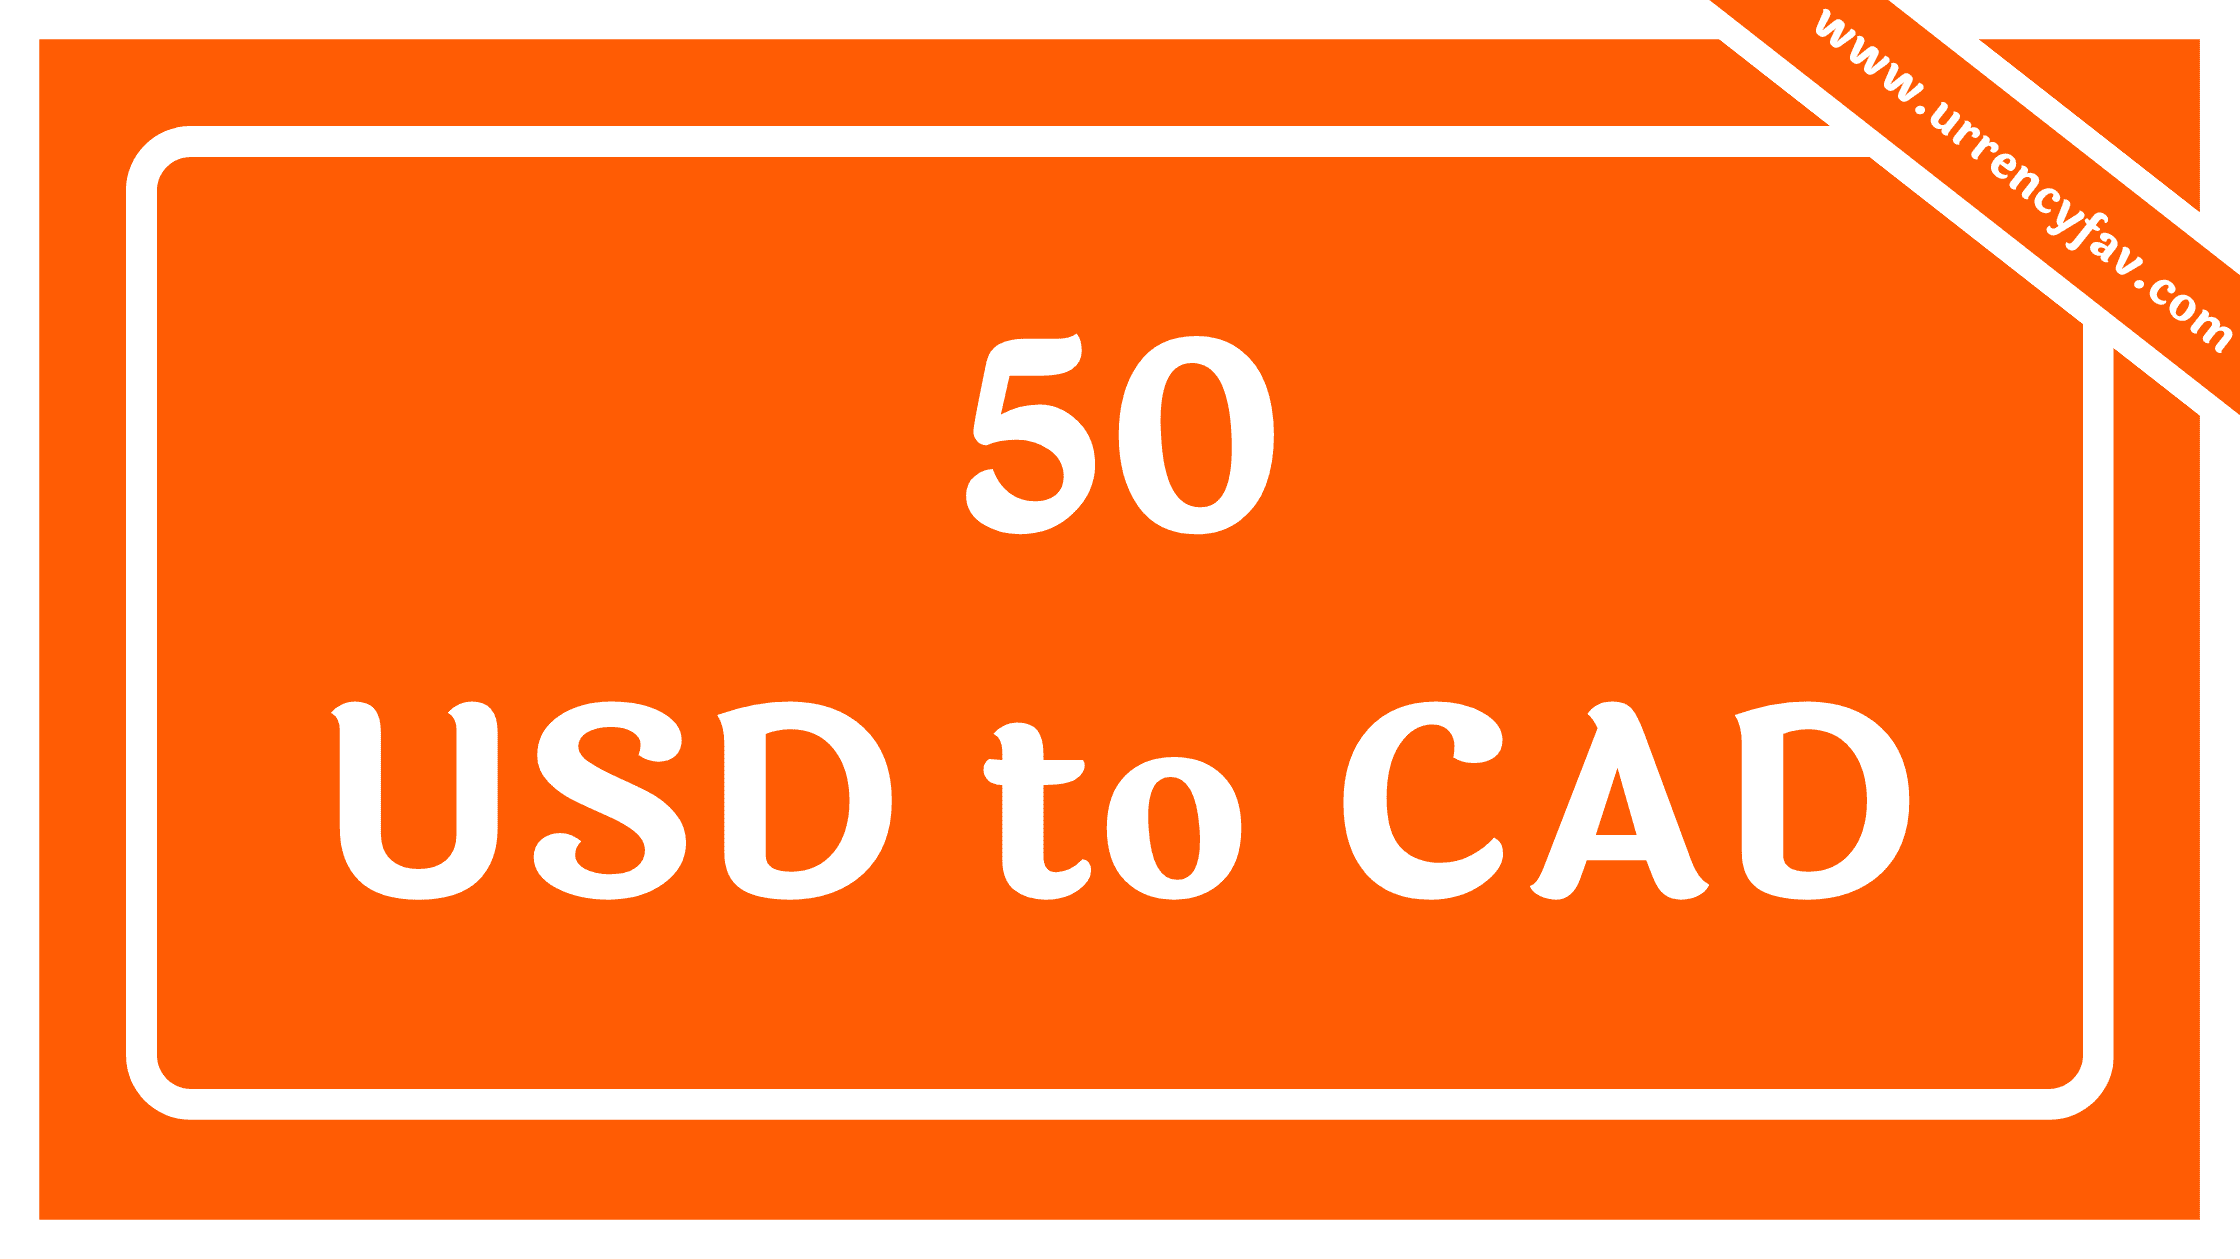 50 USD to CAD